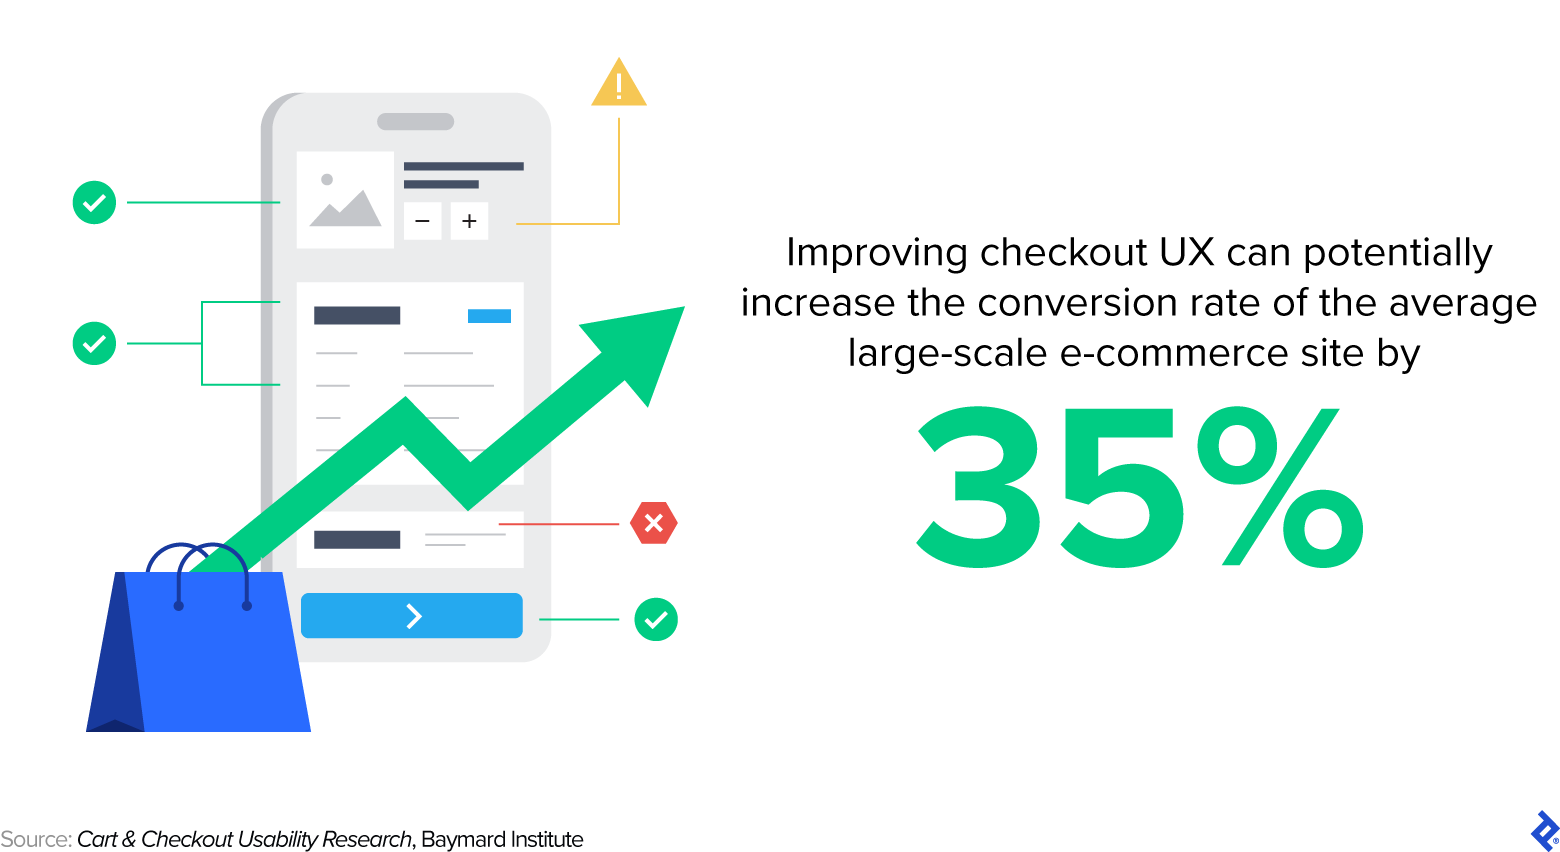 An app is displayed next to the text: “Improving checkout UX can potentially increase the conversion rate of the average large-scale e-commerce site by 35%.”